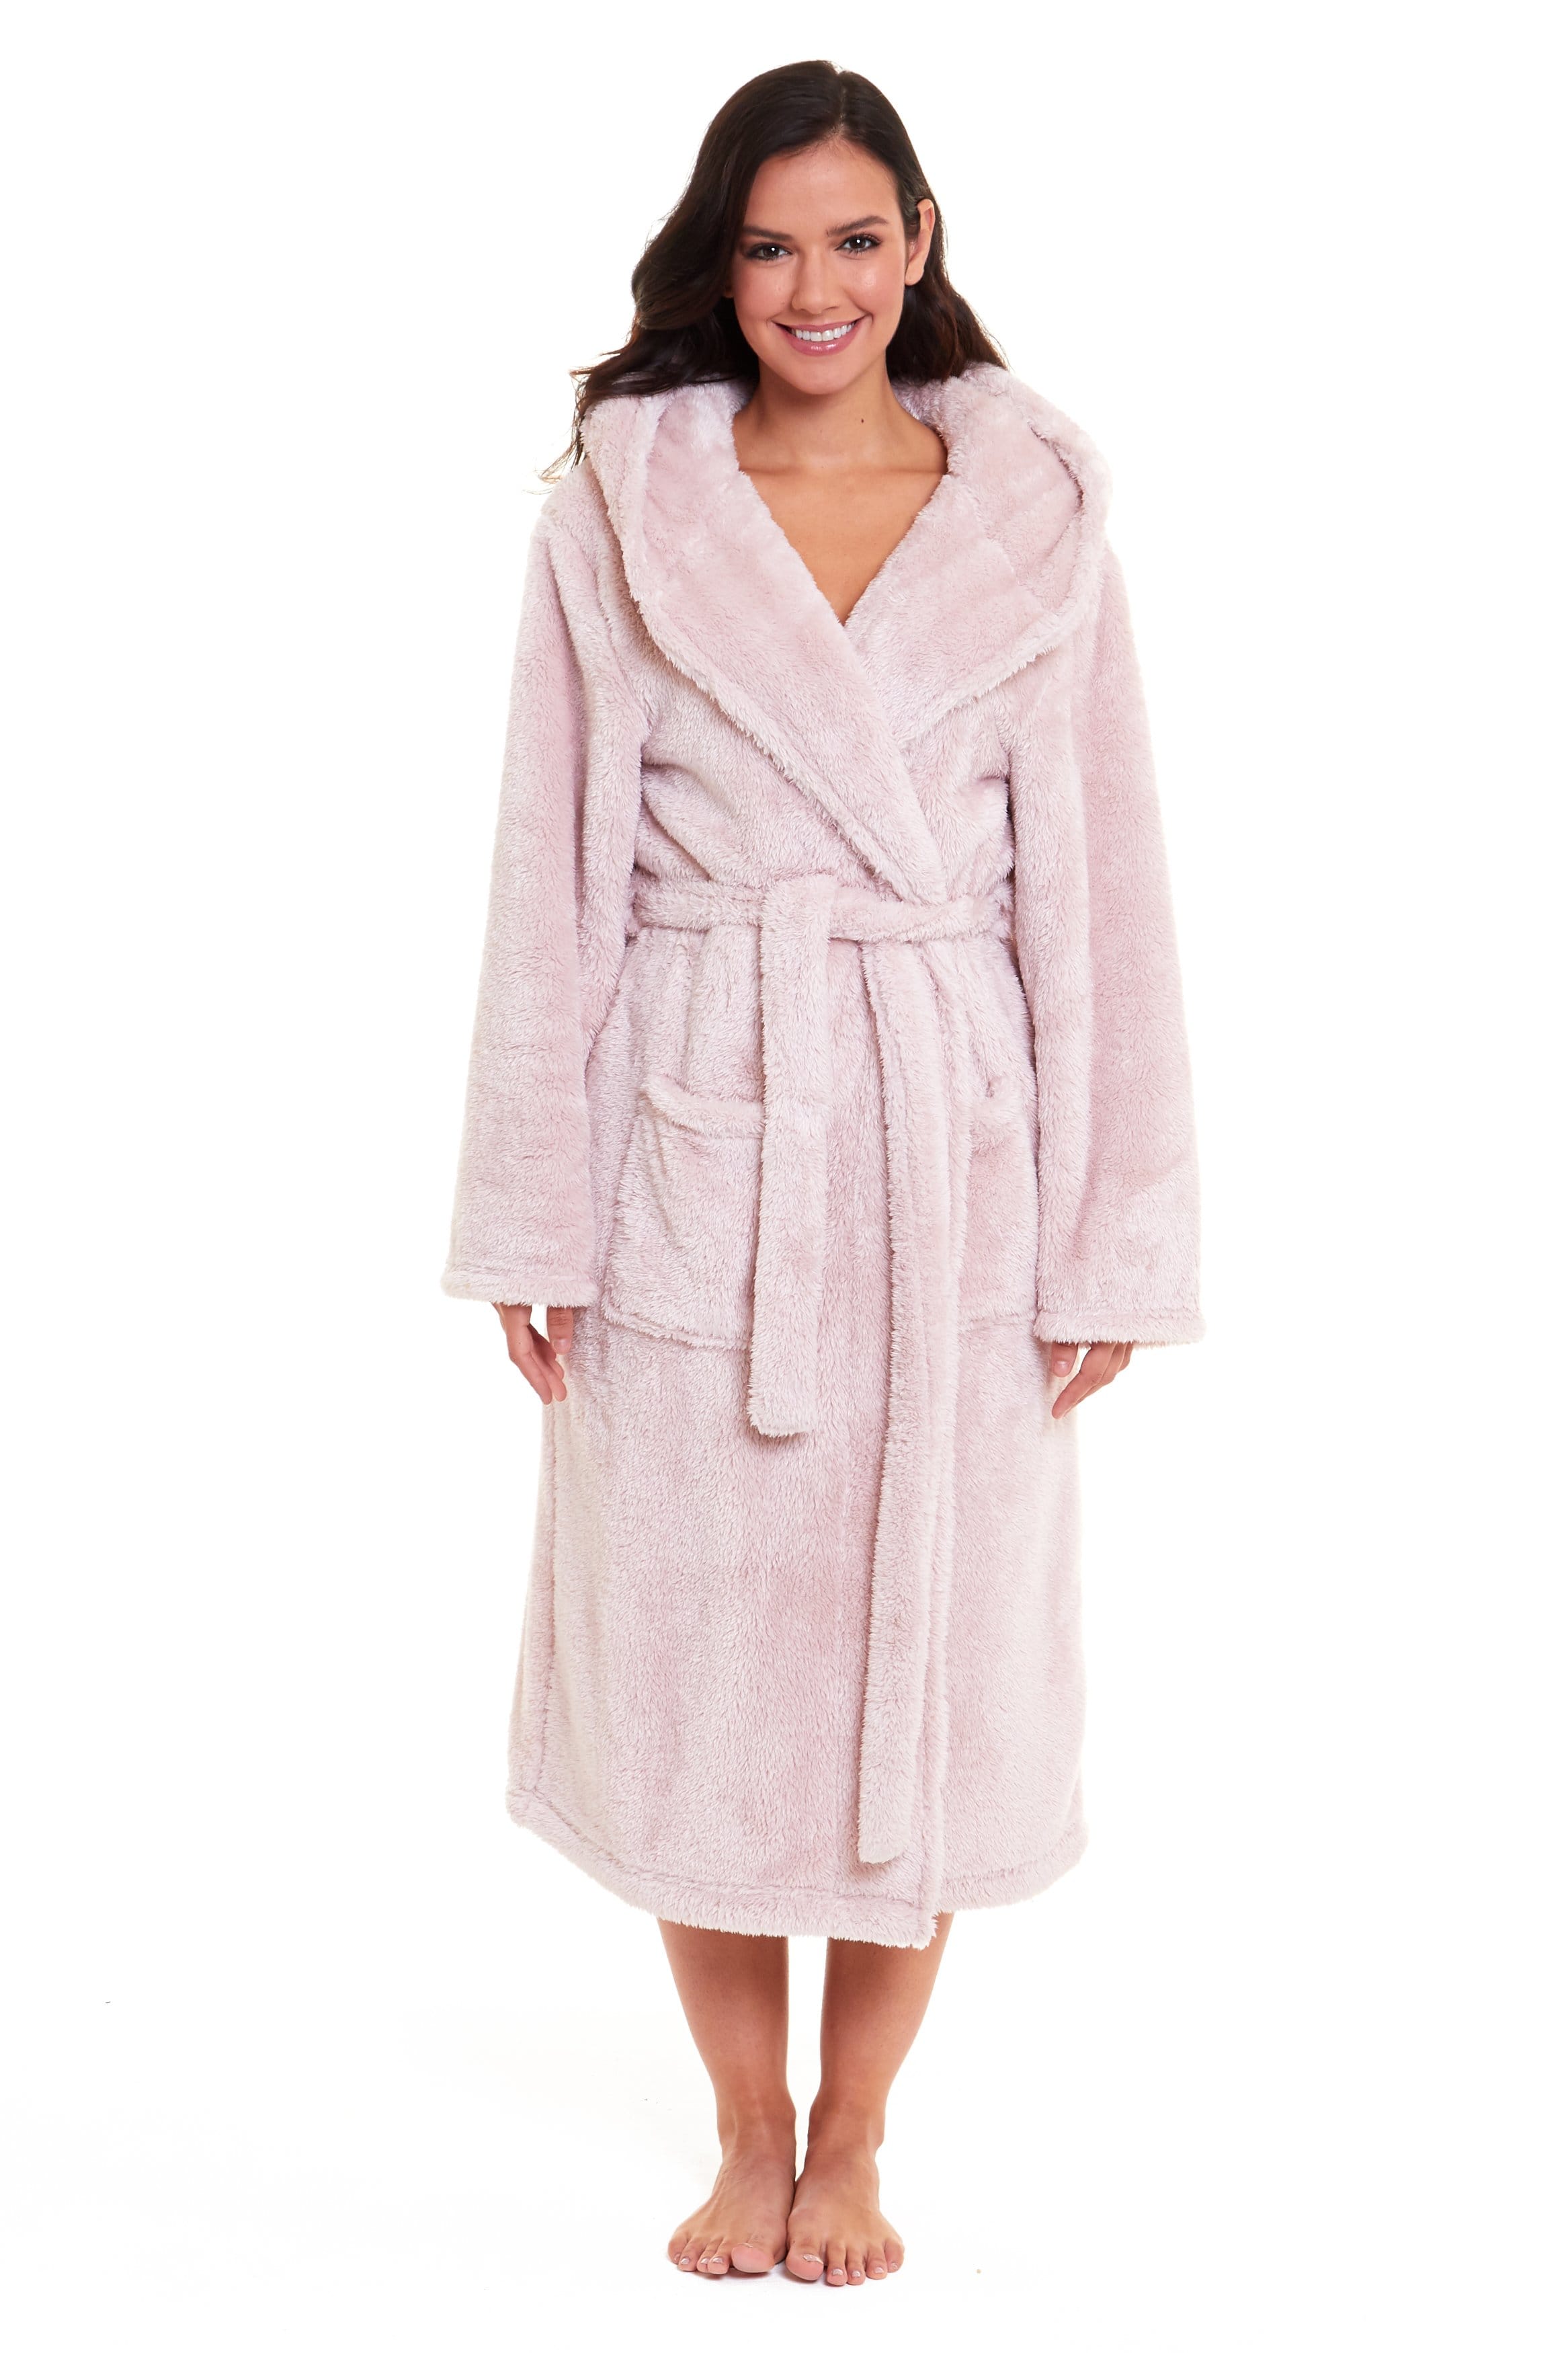 Buy Long Bath Robe for Womens Plush Soft Fleece Bathrobes Nightgown Ladies  Pajamas Sleepwear Housecoat Wine Red Online at Low Prices in India -  Amazon.in